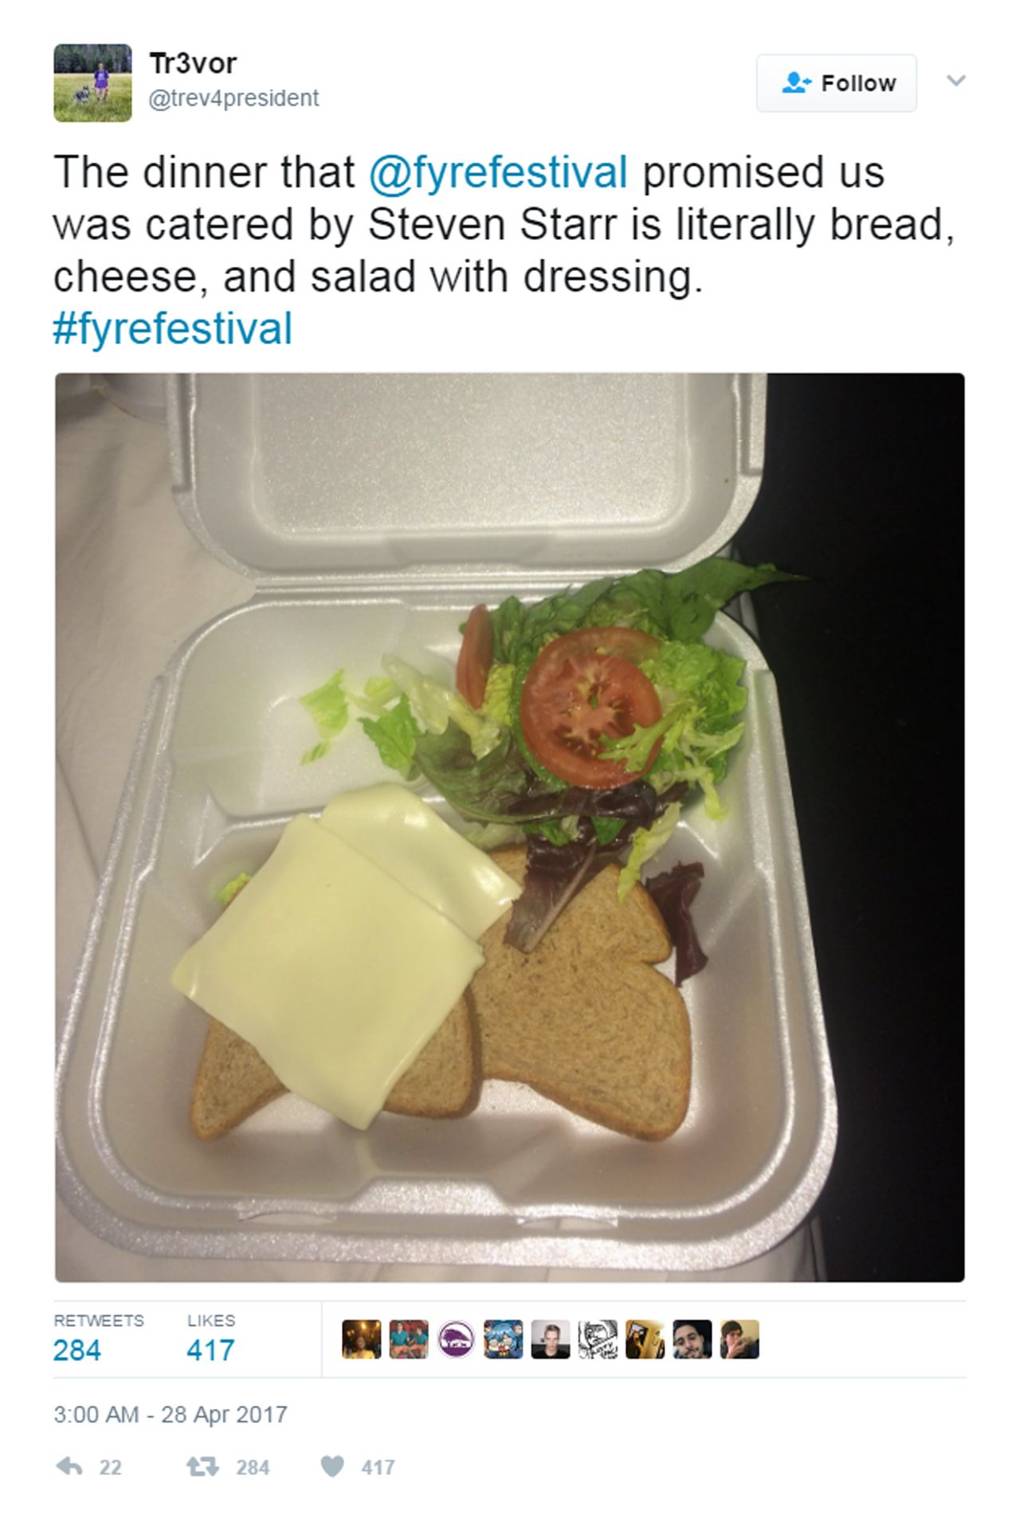 Fyre Festival Twitter Screenshot of Cheese on Bread that came to epitomize the Fyre Festival. The Caption reads: "The dinner that @fyrefestival promised us was catered by Steven Sarr is literally bread, cheese, and salad with dressing. #fyrefestival